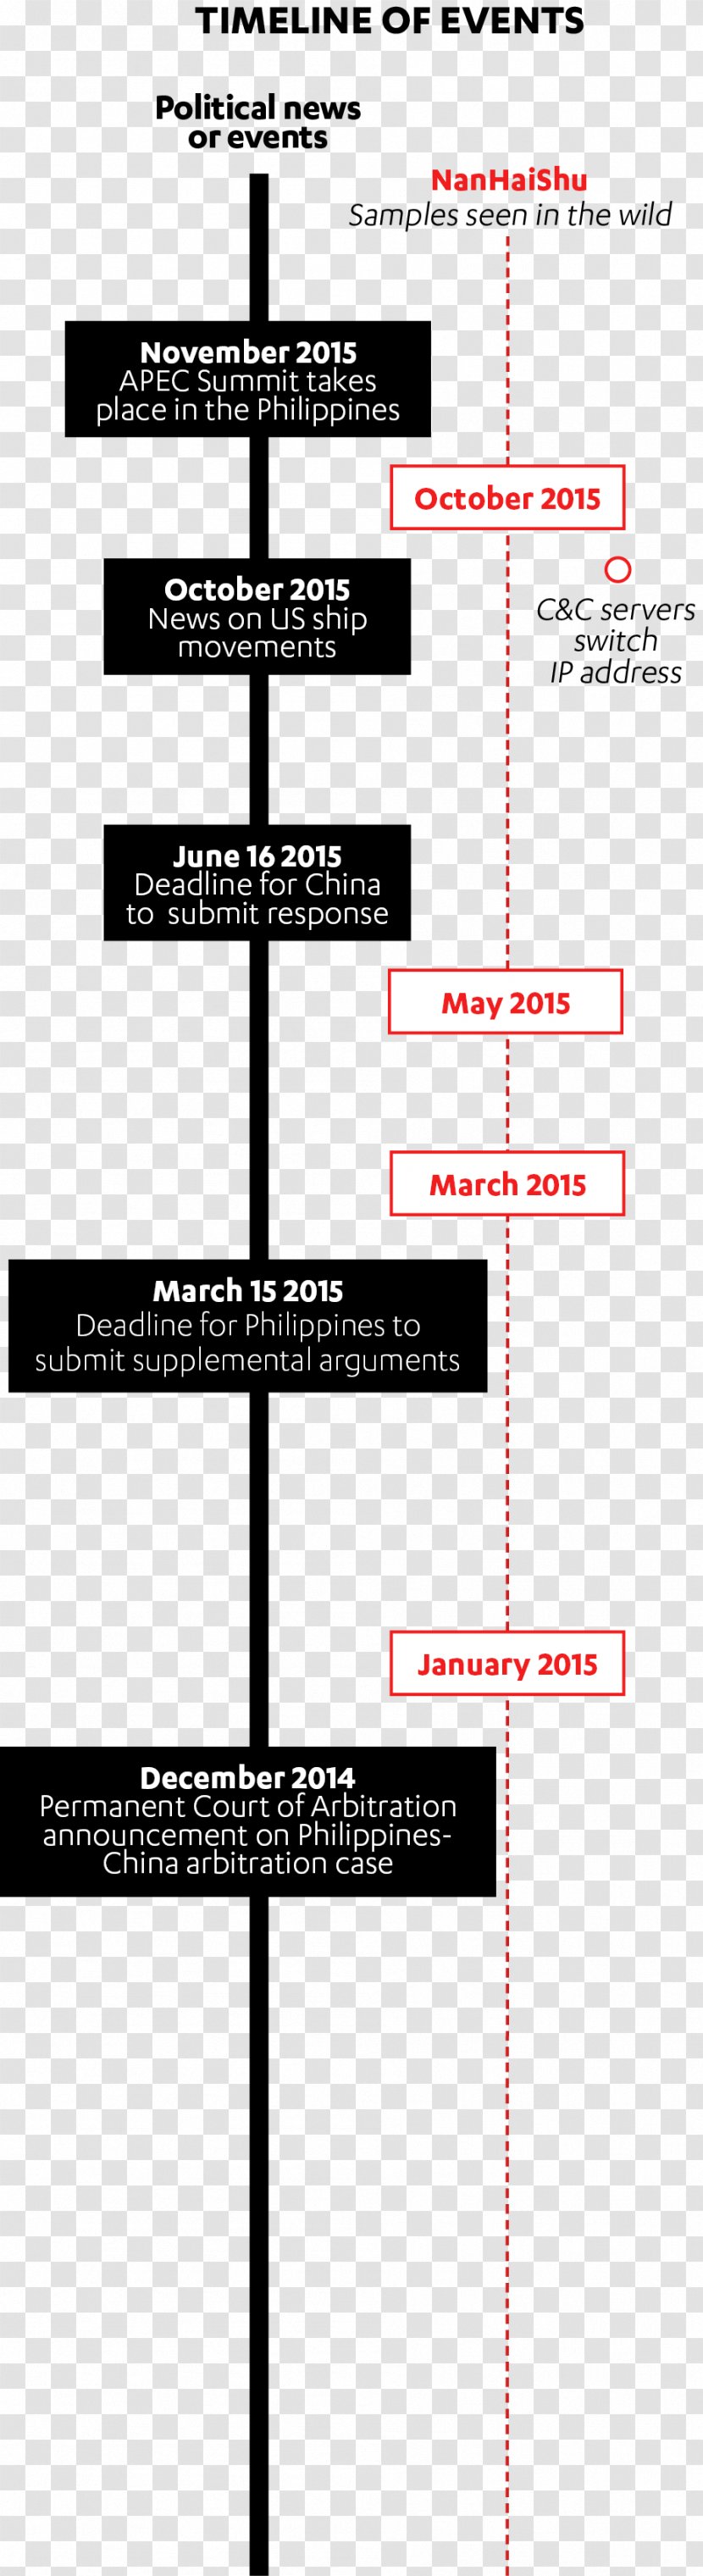 Territorial Disputes In The South China Sea Timeline Chronology Transparent PNG